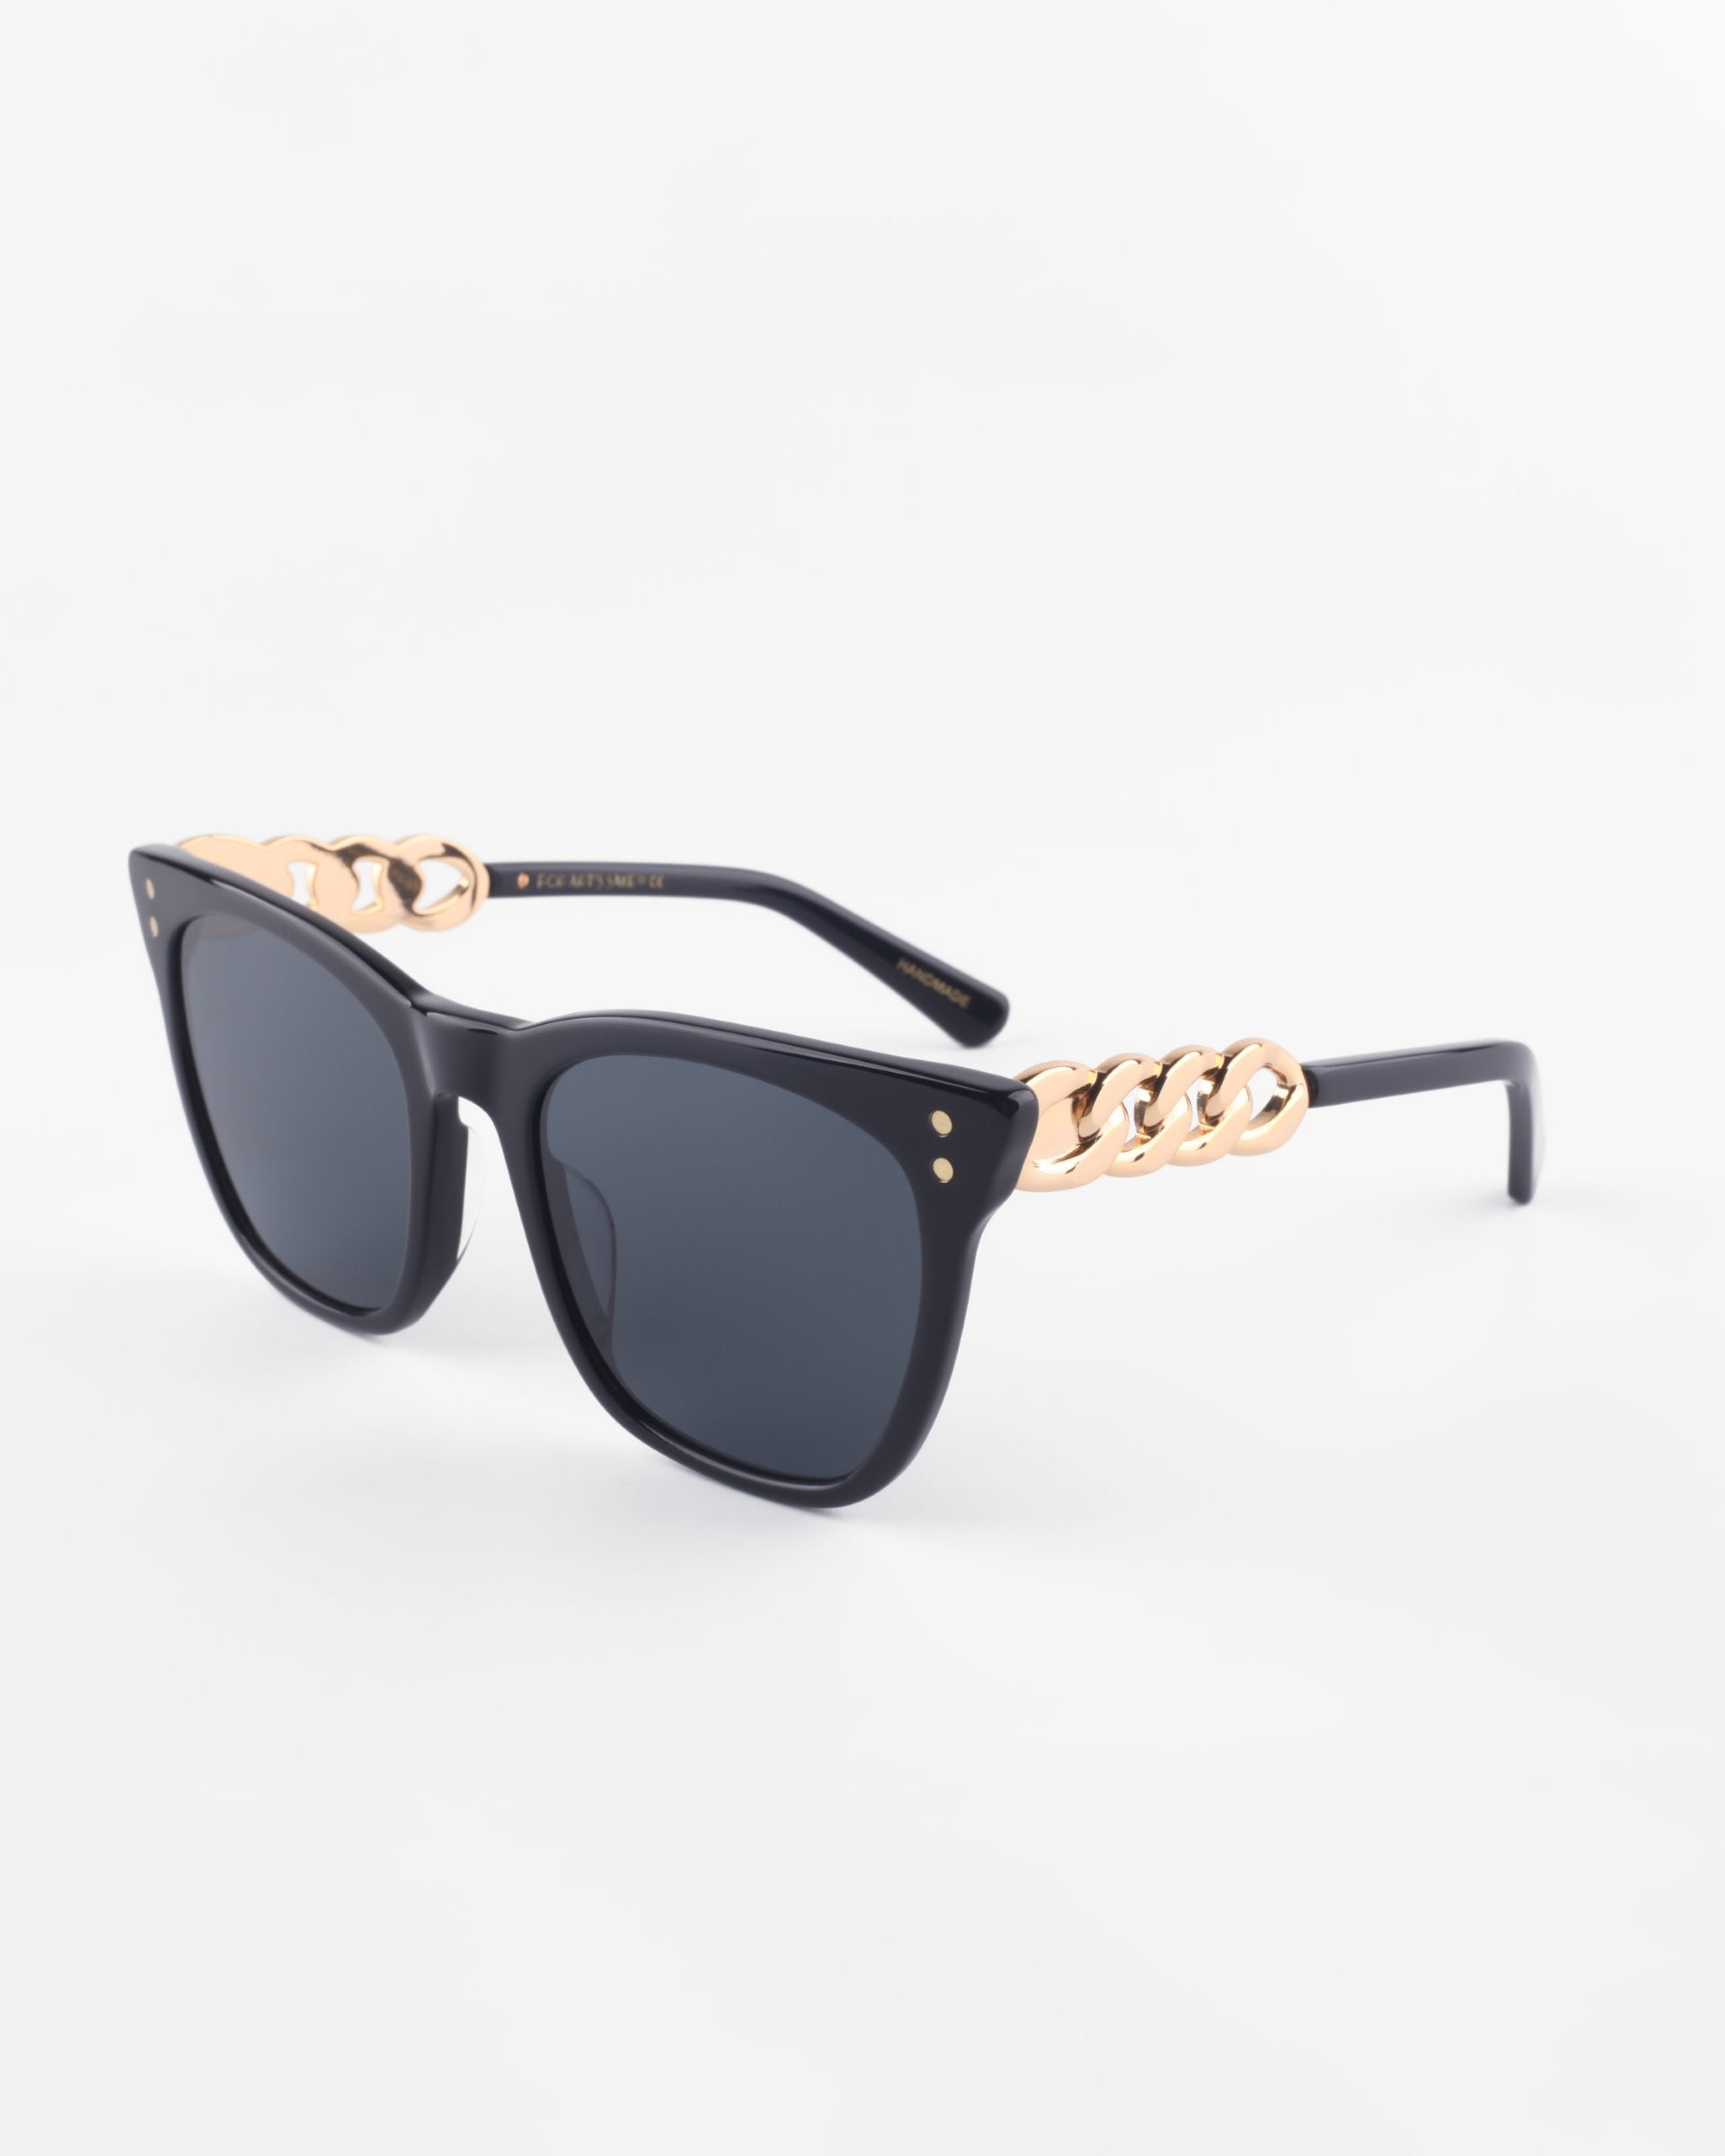 A pair of stylish black cat-eye Deco sunglasses with dark lenses from For Art&#39;s Sake®. The acetate temples feature a unique design with chunky gold chain links near the hinges, adding a touch of luxury to the classic black frames. The background is plain white.